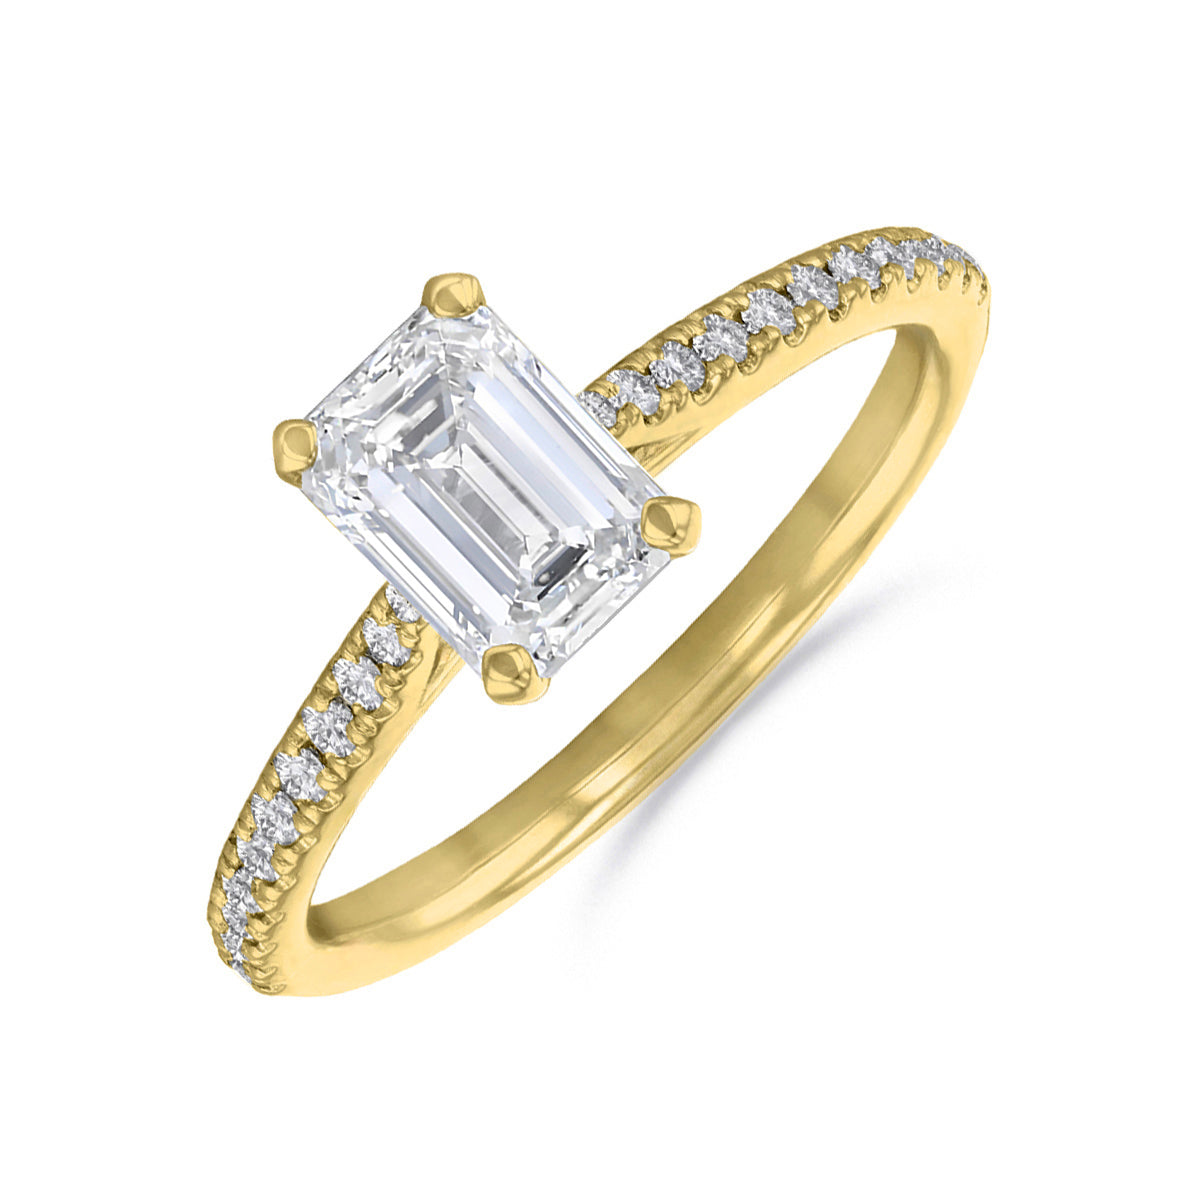 1-00ct-ophelia-shoulder-set-emerald-cut-solitaire-diamond-engagement-ring-18ct-yellow-gold